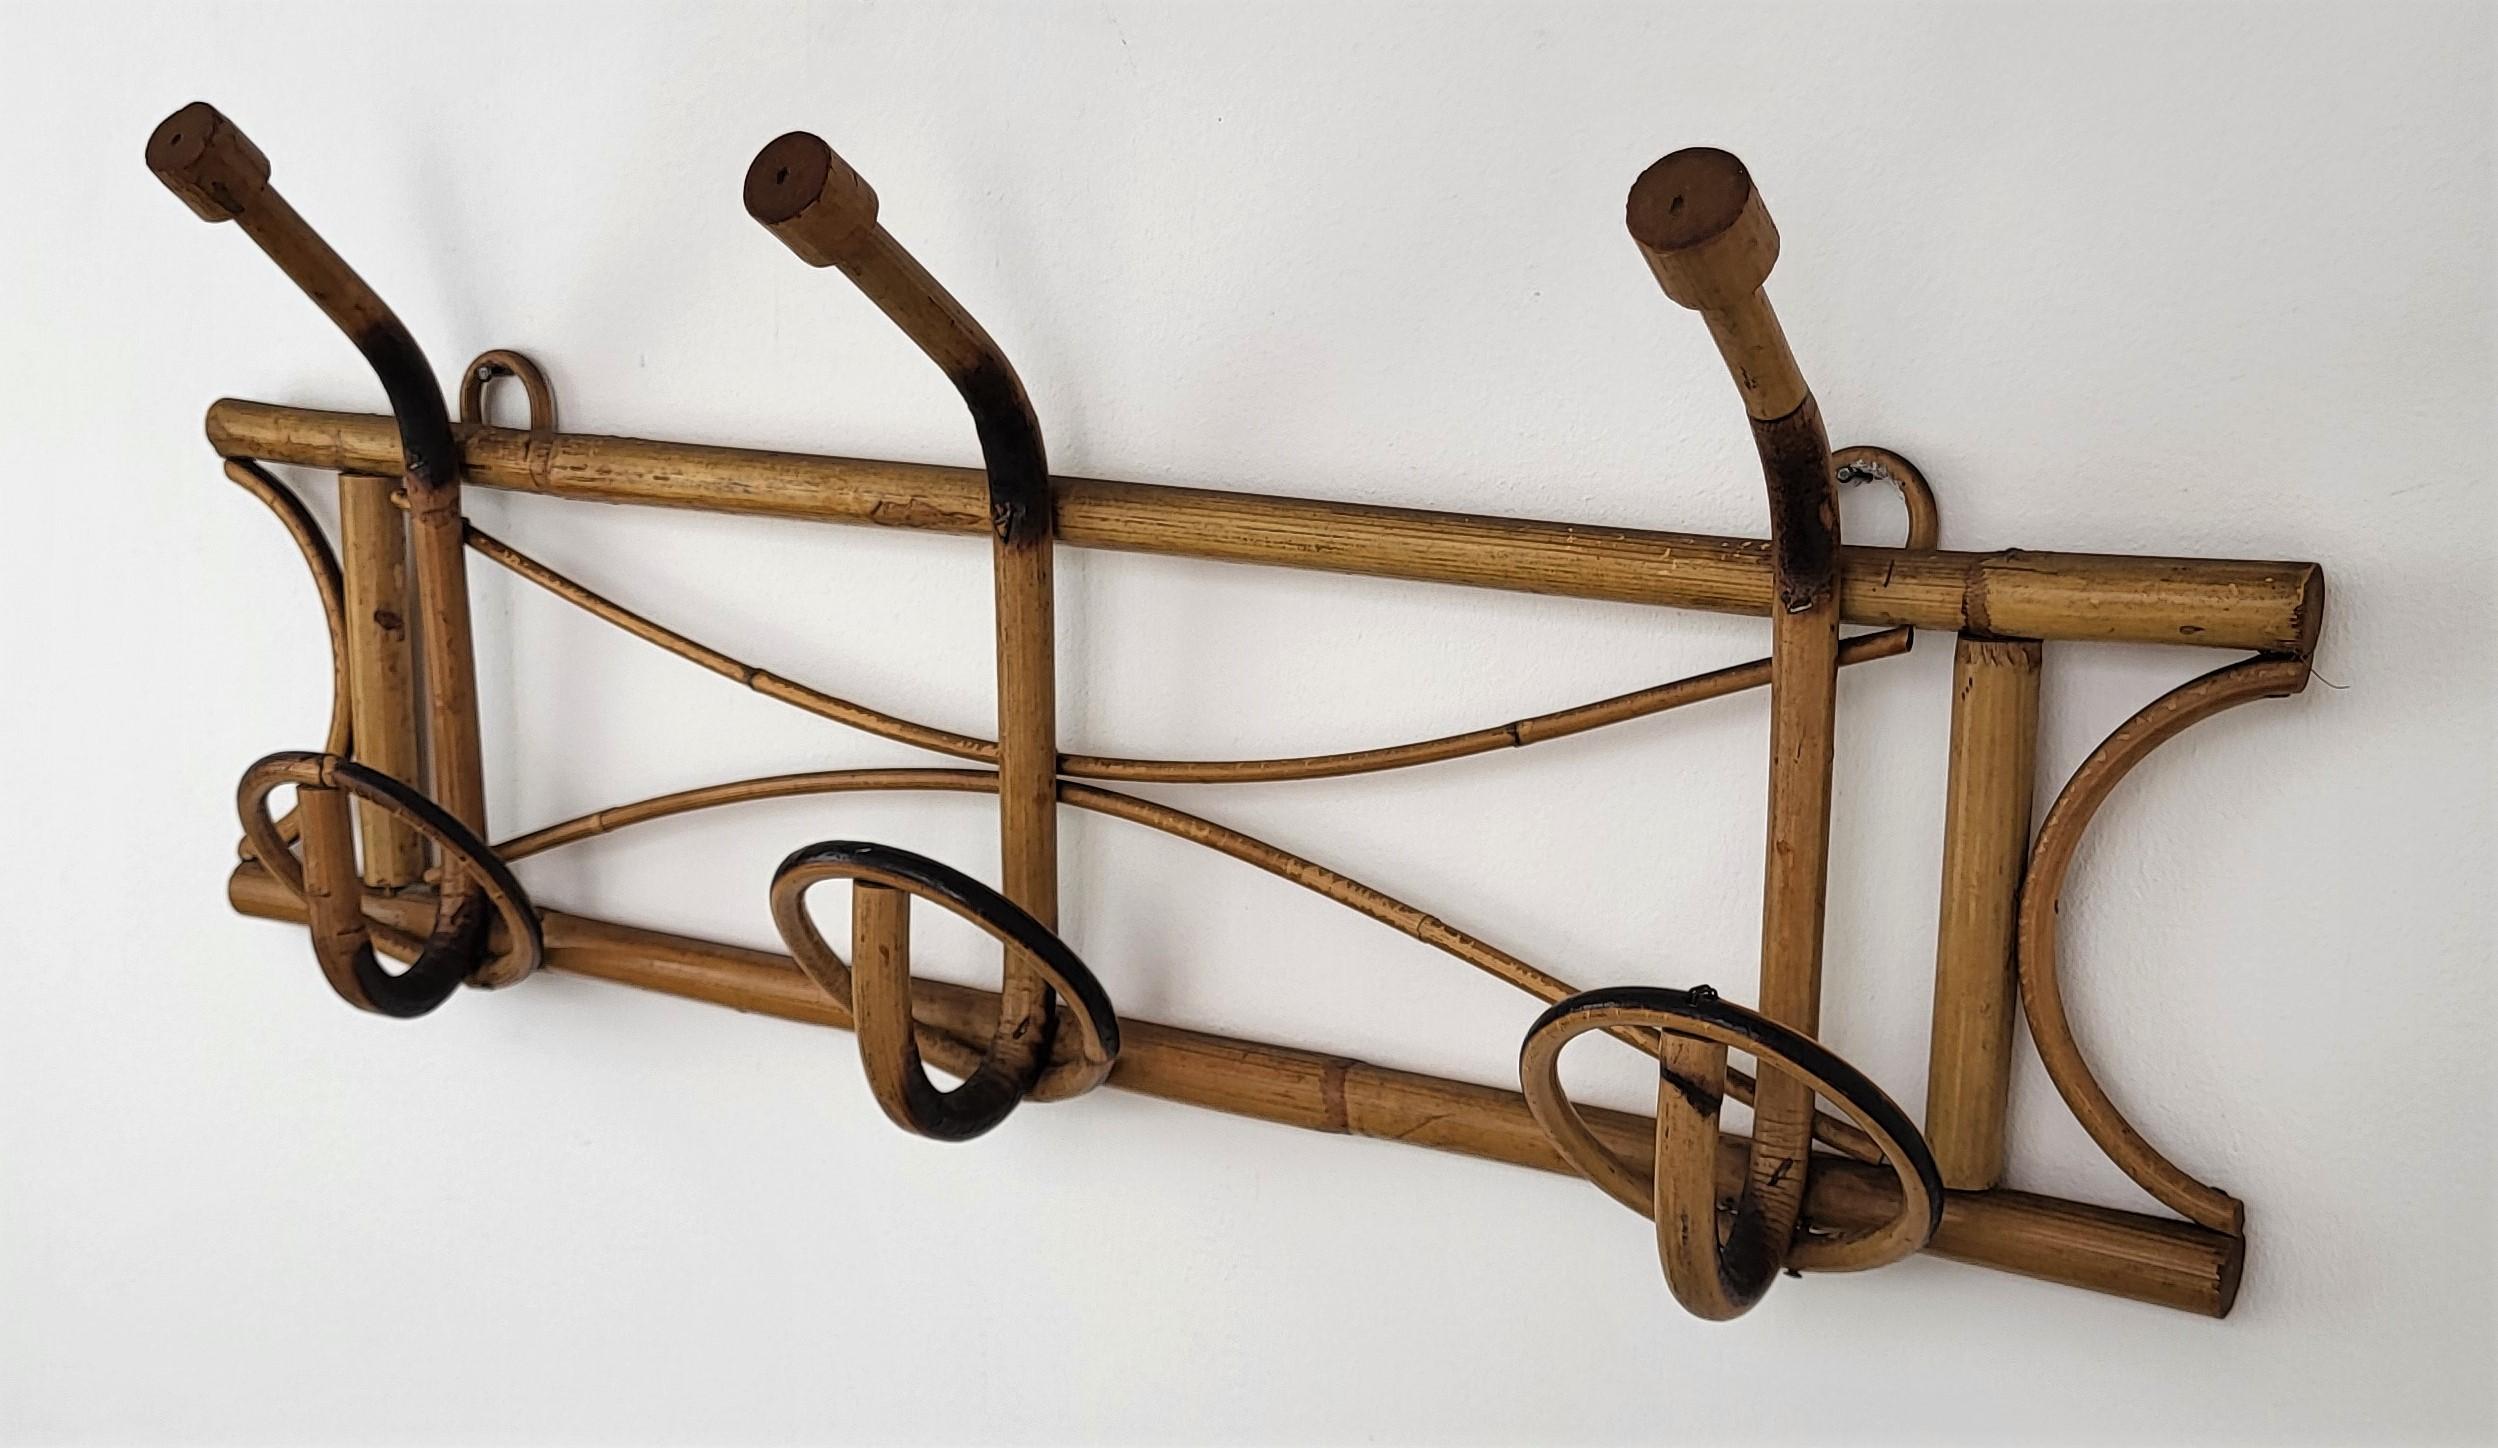 Beautiful 1960s Italian Mid-Century Modern coat hanger rack perfect in any entrance hallway or room for coats and bags as well as in a bedroom or bathroom for bathrobes and towels. This charming piece is in the typical style of Audoux and Minet